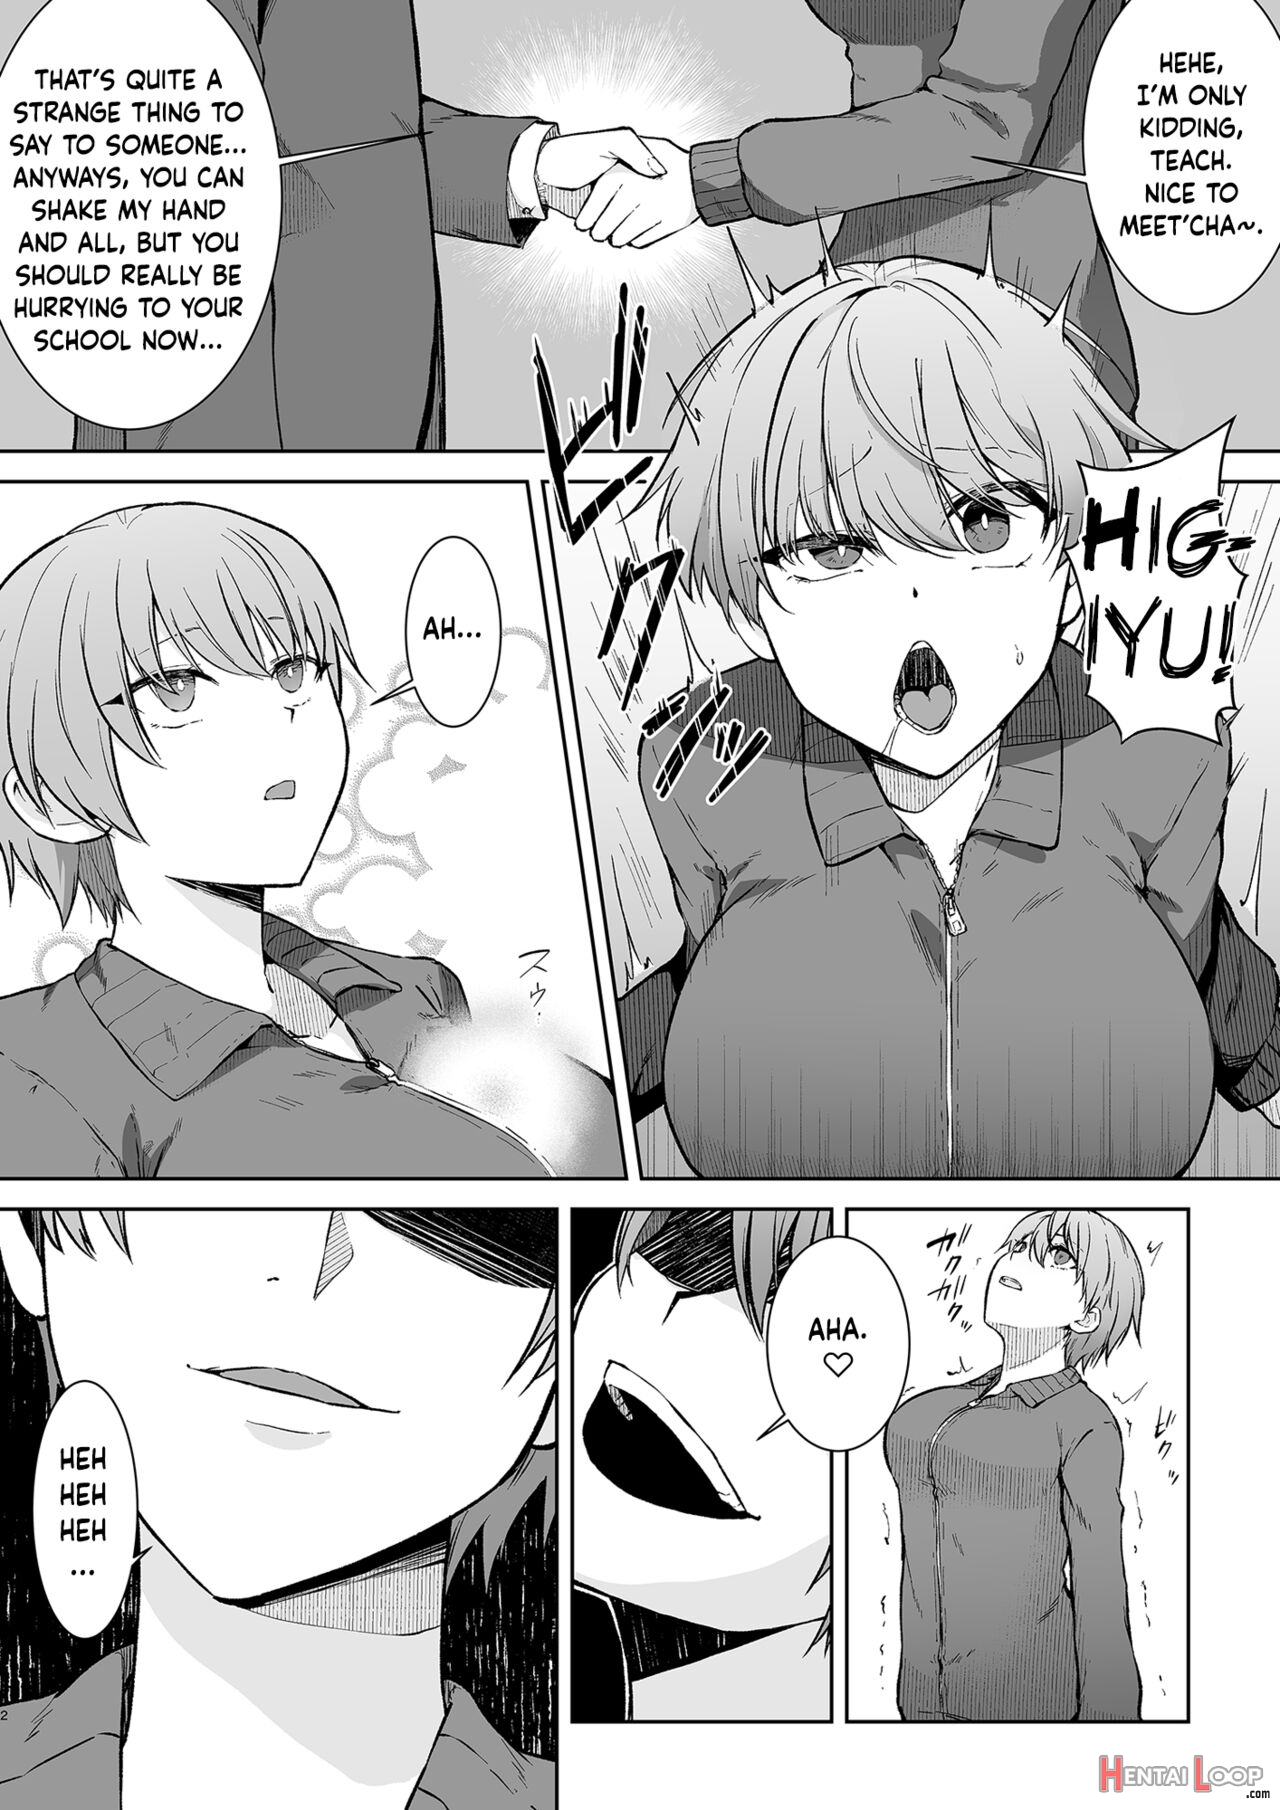 Schoolgirl Infiltration Report ~a Criminal Possessing Girls~ page 2